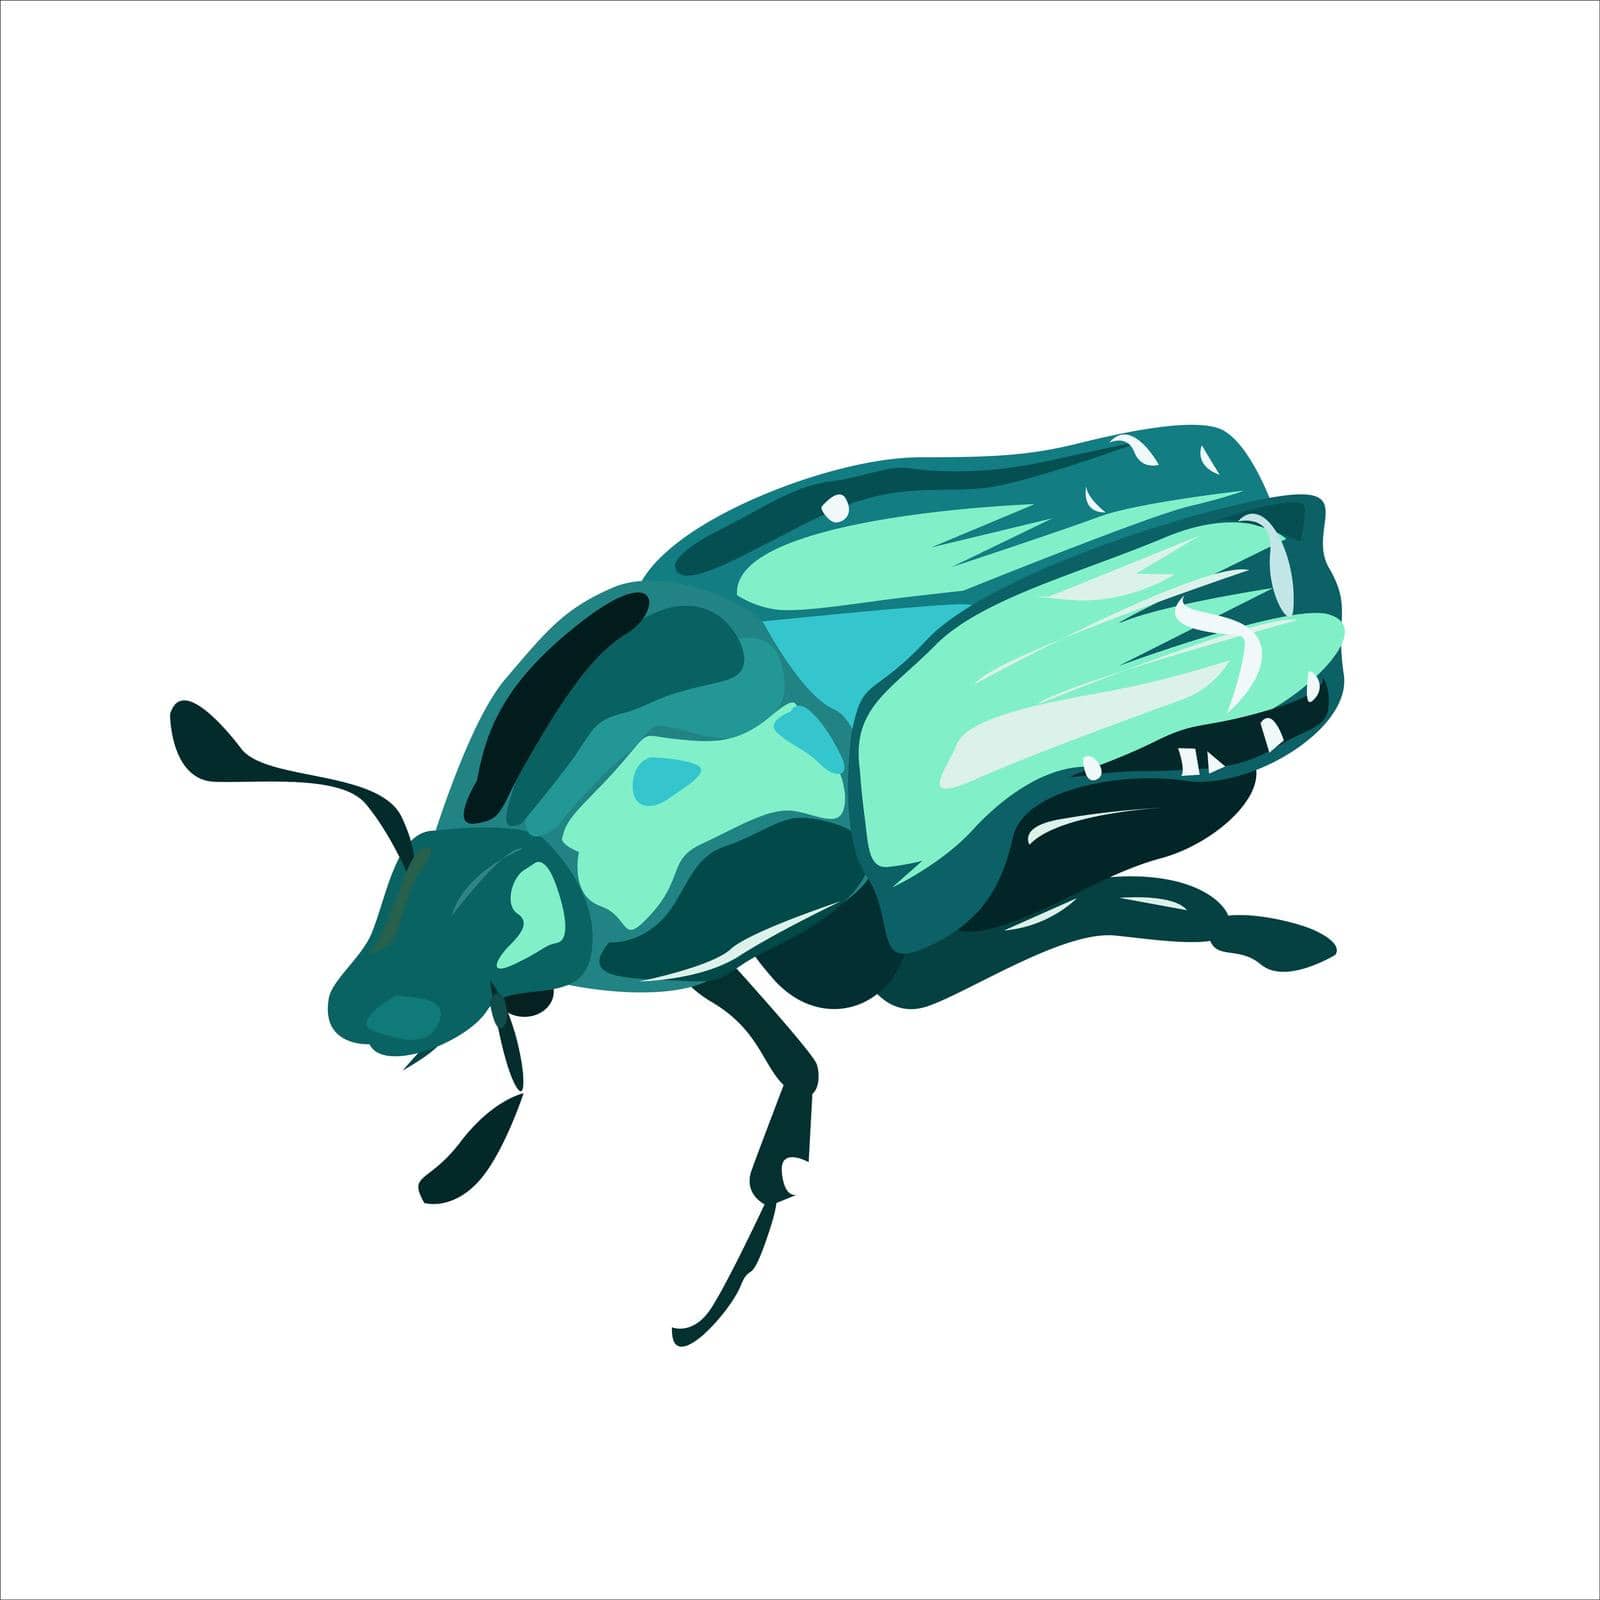 May bug shimmering on a white background in a realistic style